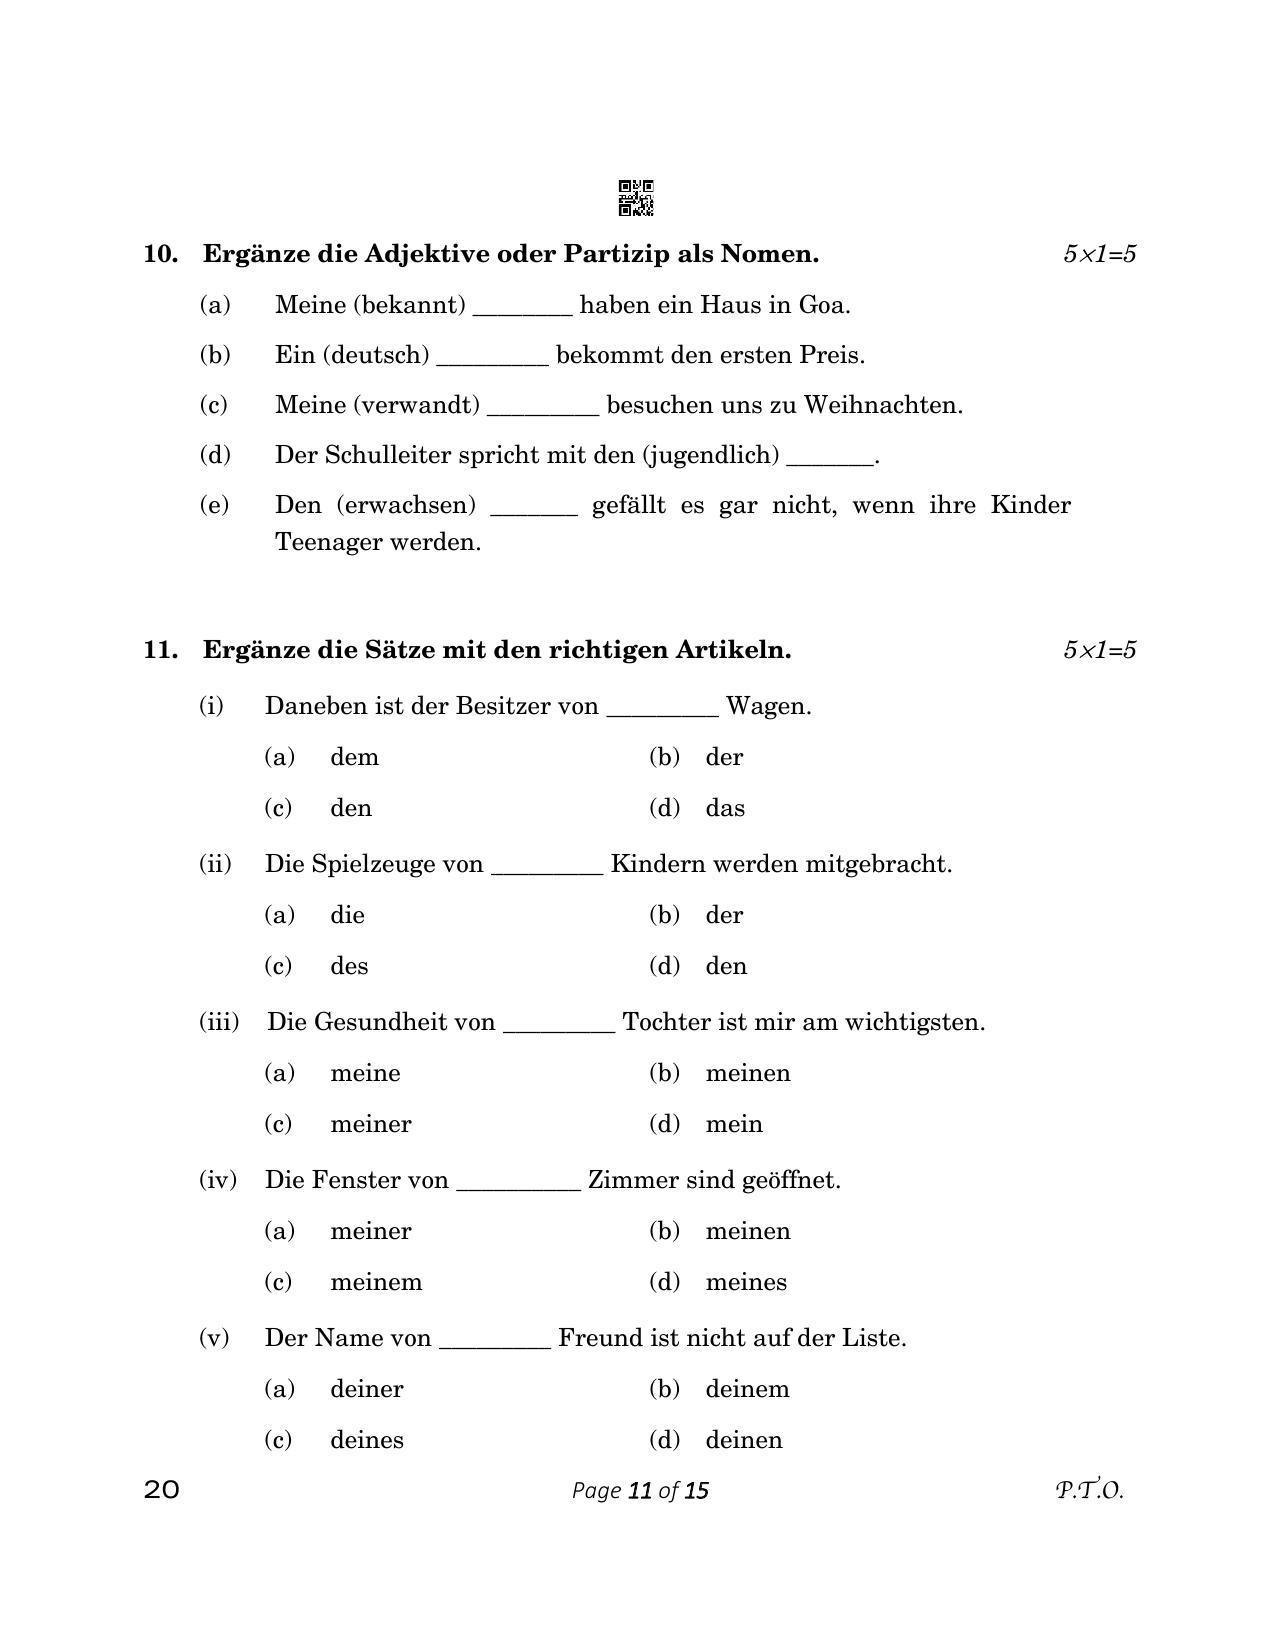 CBSE Class 12 20_German 2023 Question Paper - Page 11